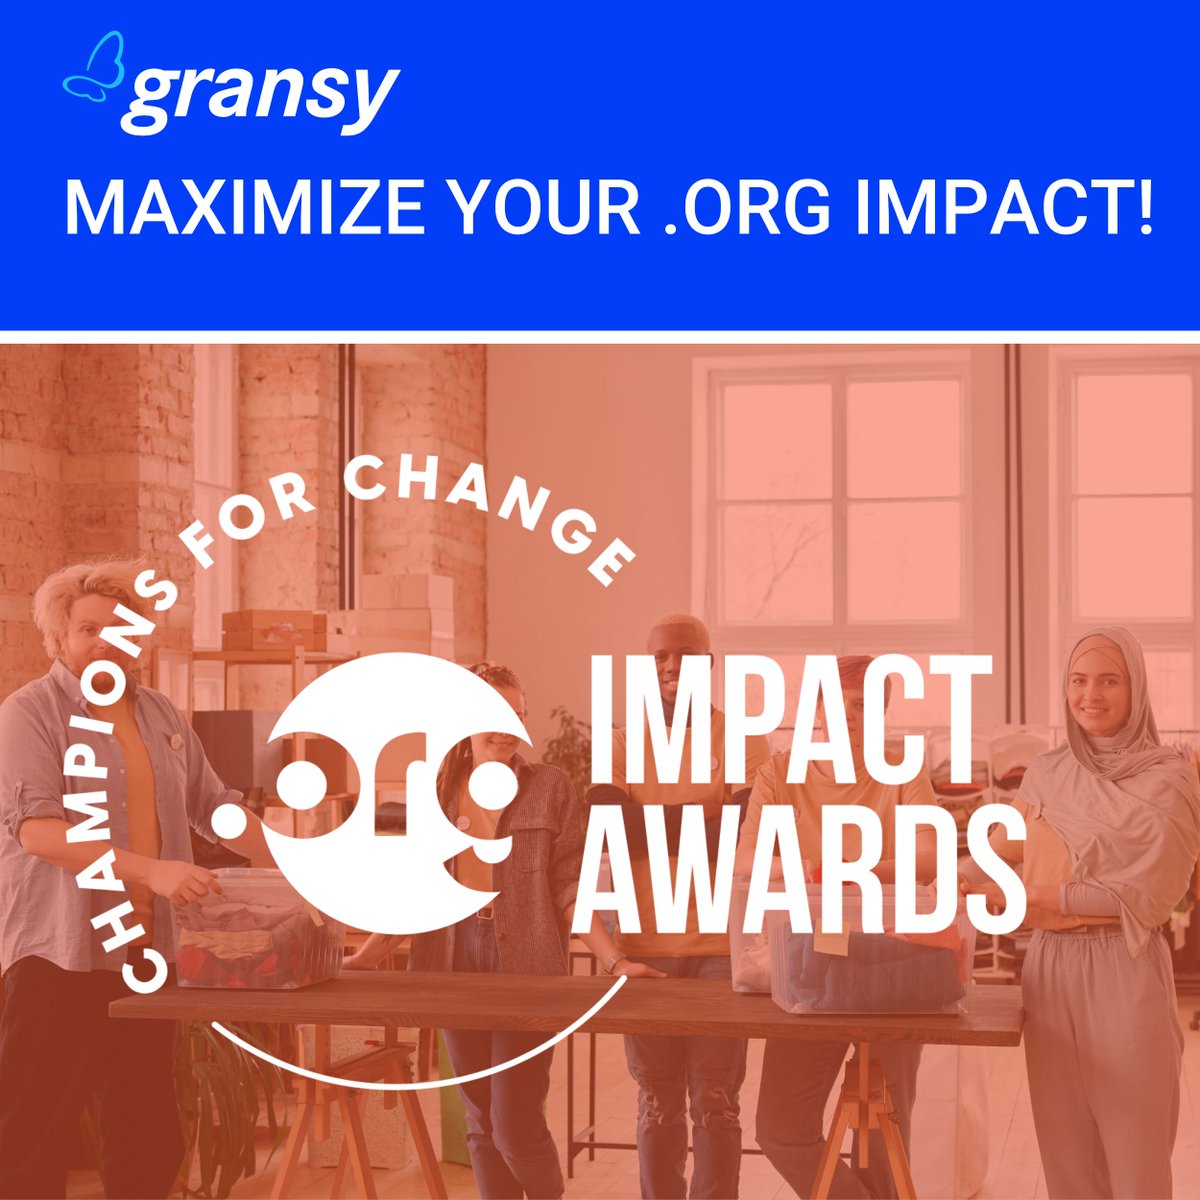 .ORGs are an essential part of our #communities. The #ORGImpactAwards recognizes those who have enhanced the lives of those in the communities they serve! Visit orgimpactawards.org to learn more!
☝ Only 2 days left for nomination!
#OIAs #ORGInAction @PIRegistry @OrgInAction